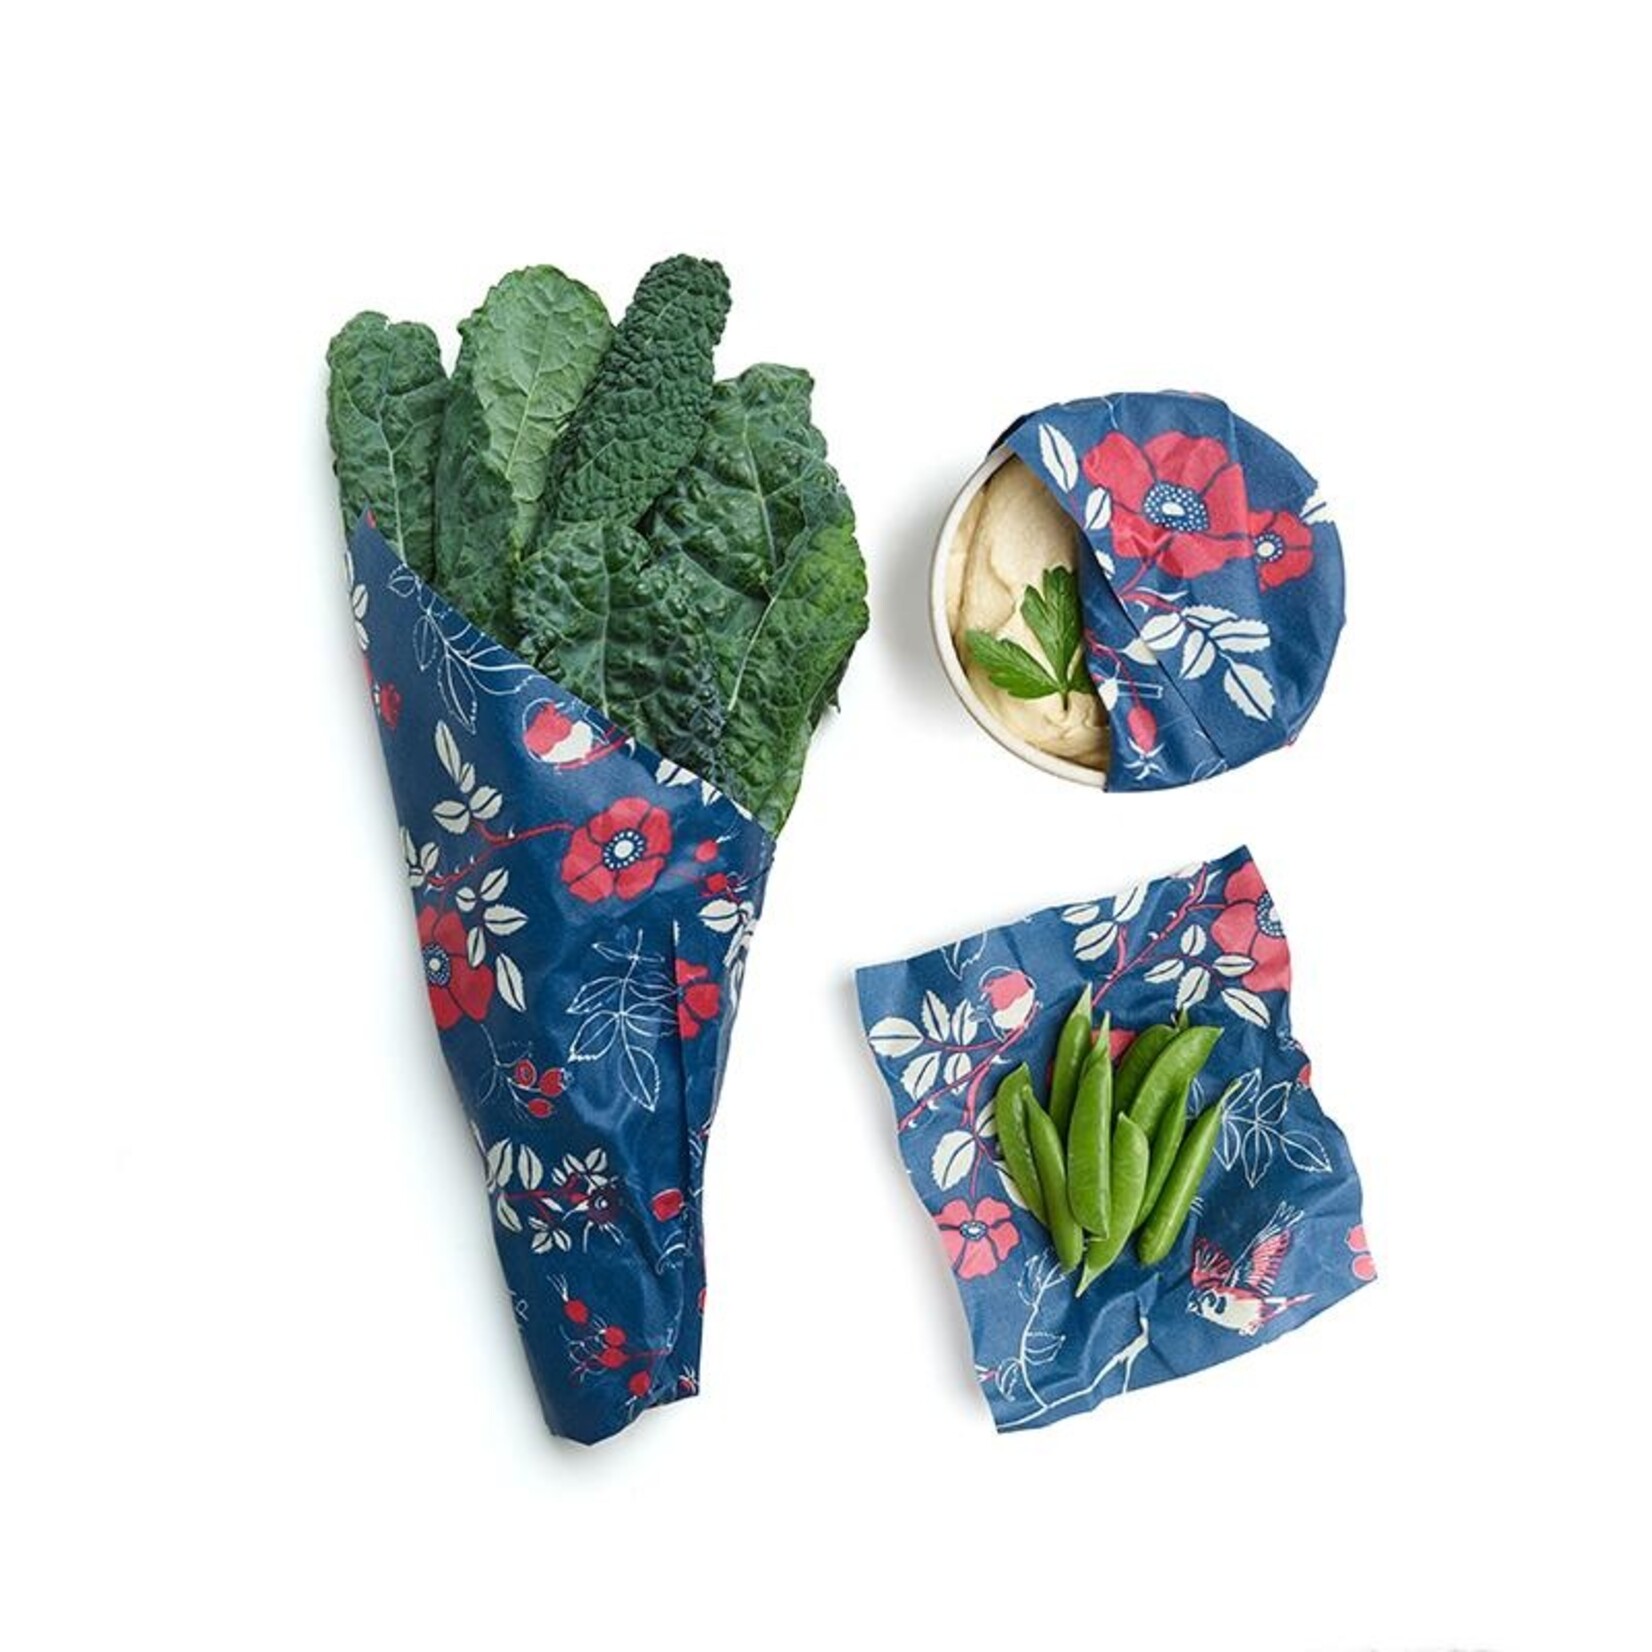 Bee's Wrap Botanical Print Assorted 3 Pack Wrap